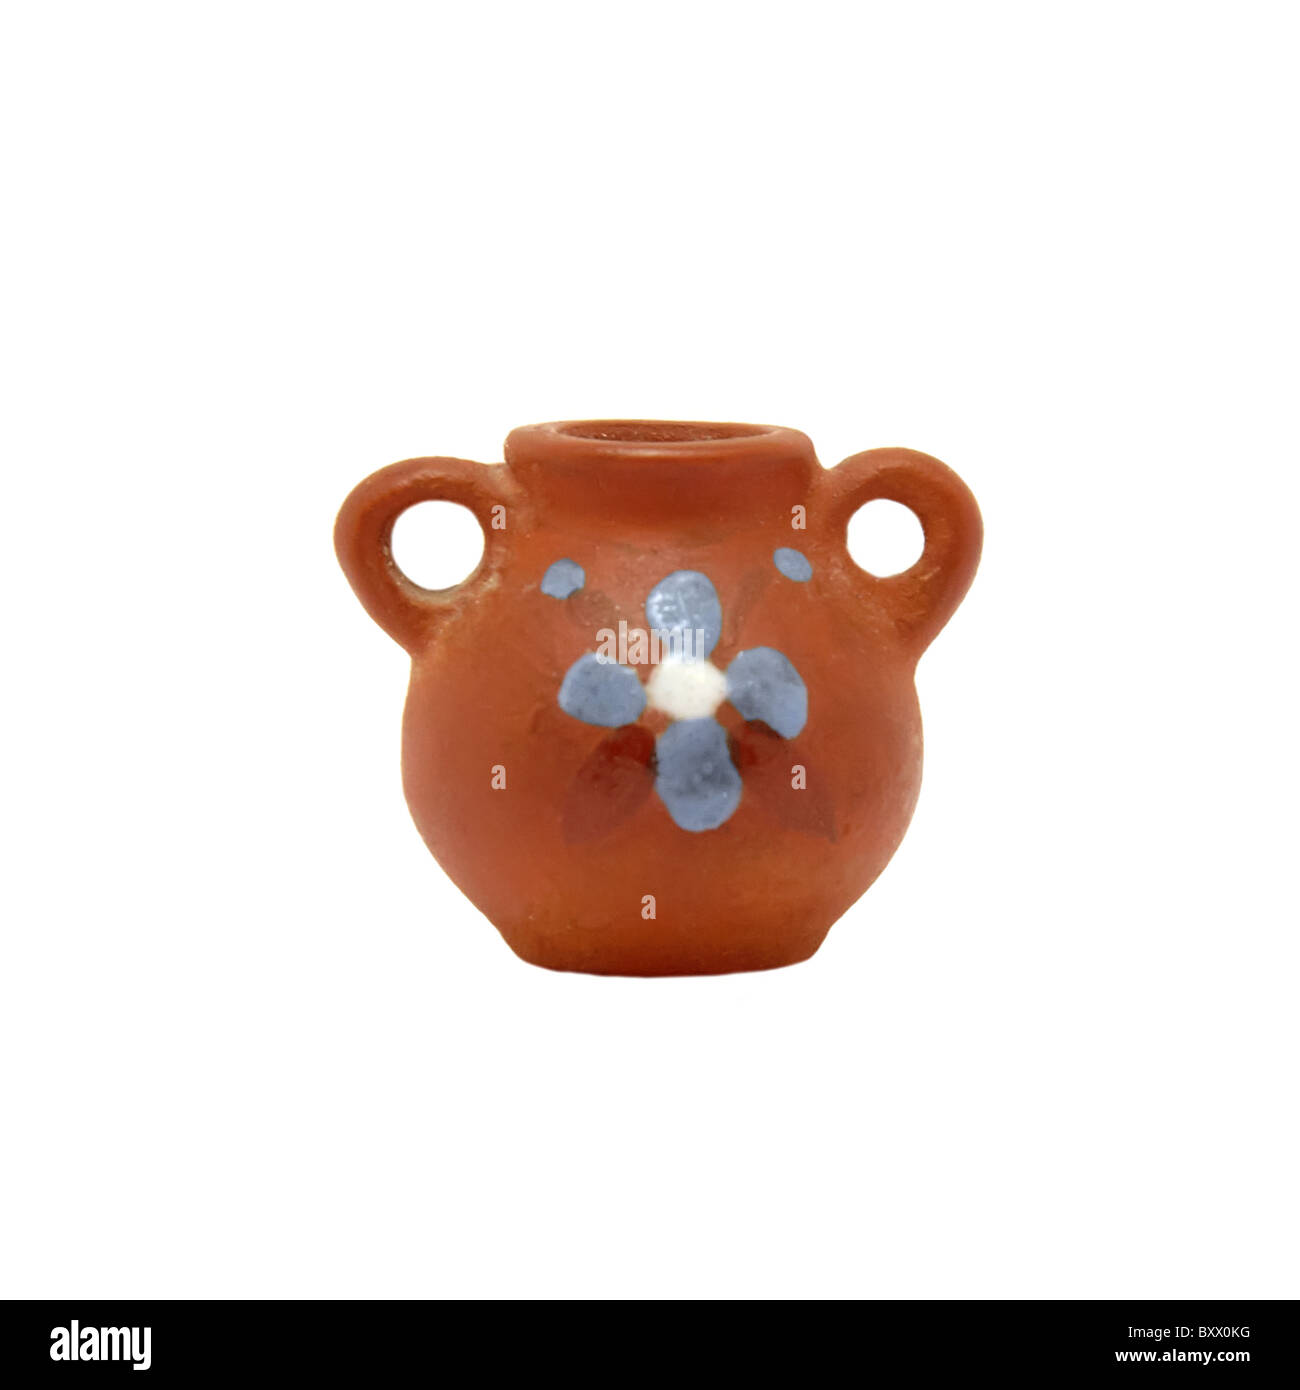 Toy pitcher - Polish traditional souvenir. Isolated on a white background. Stock Photo